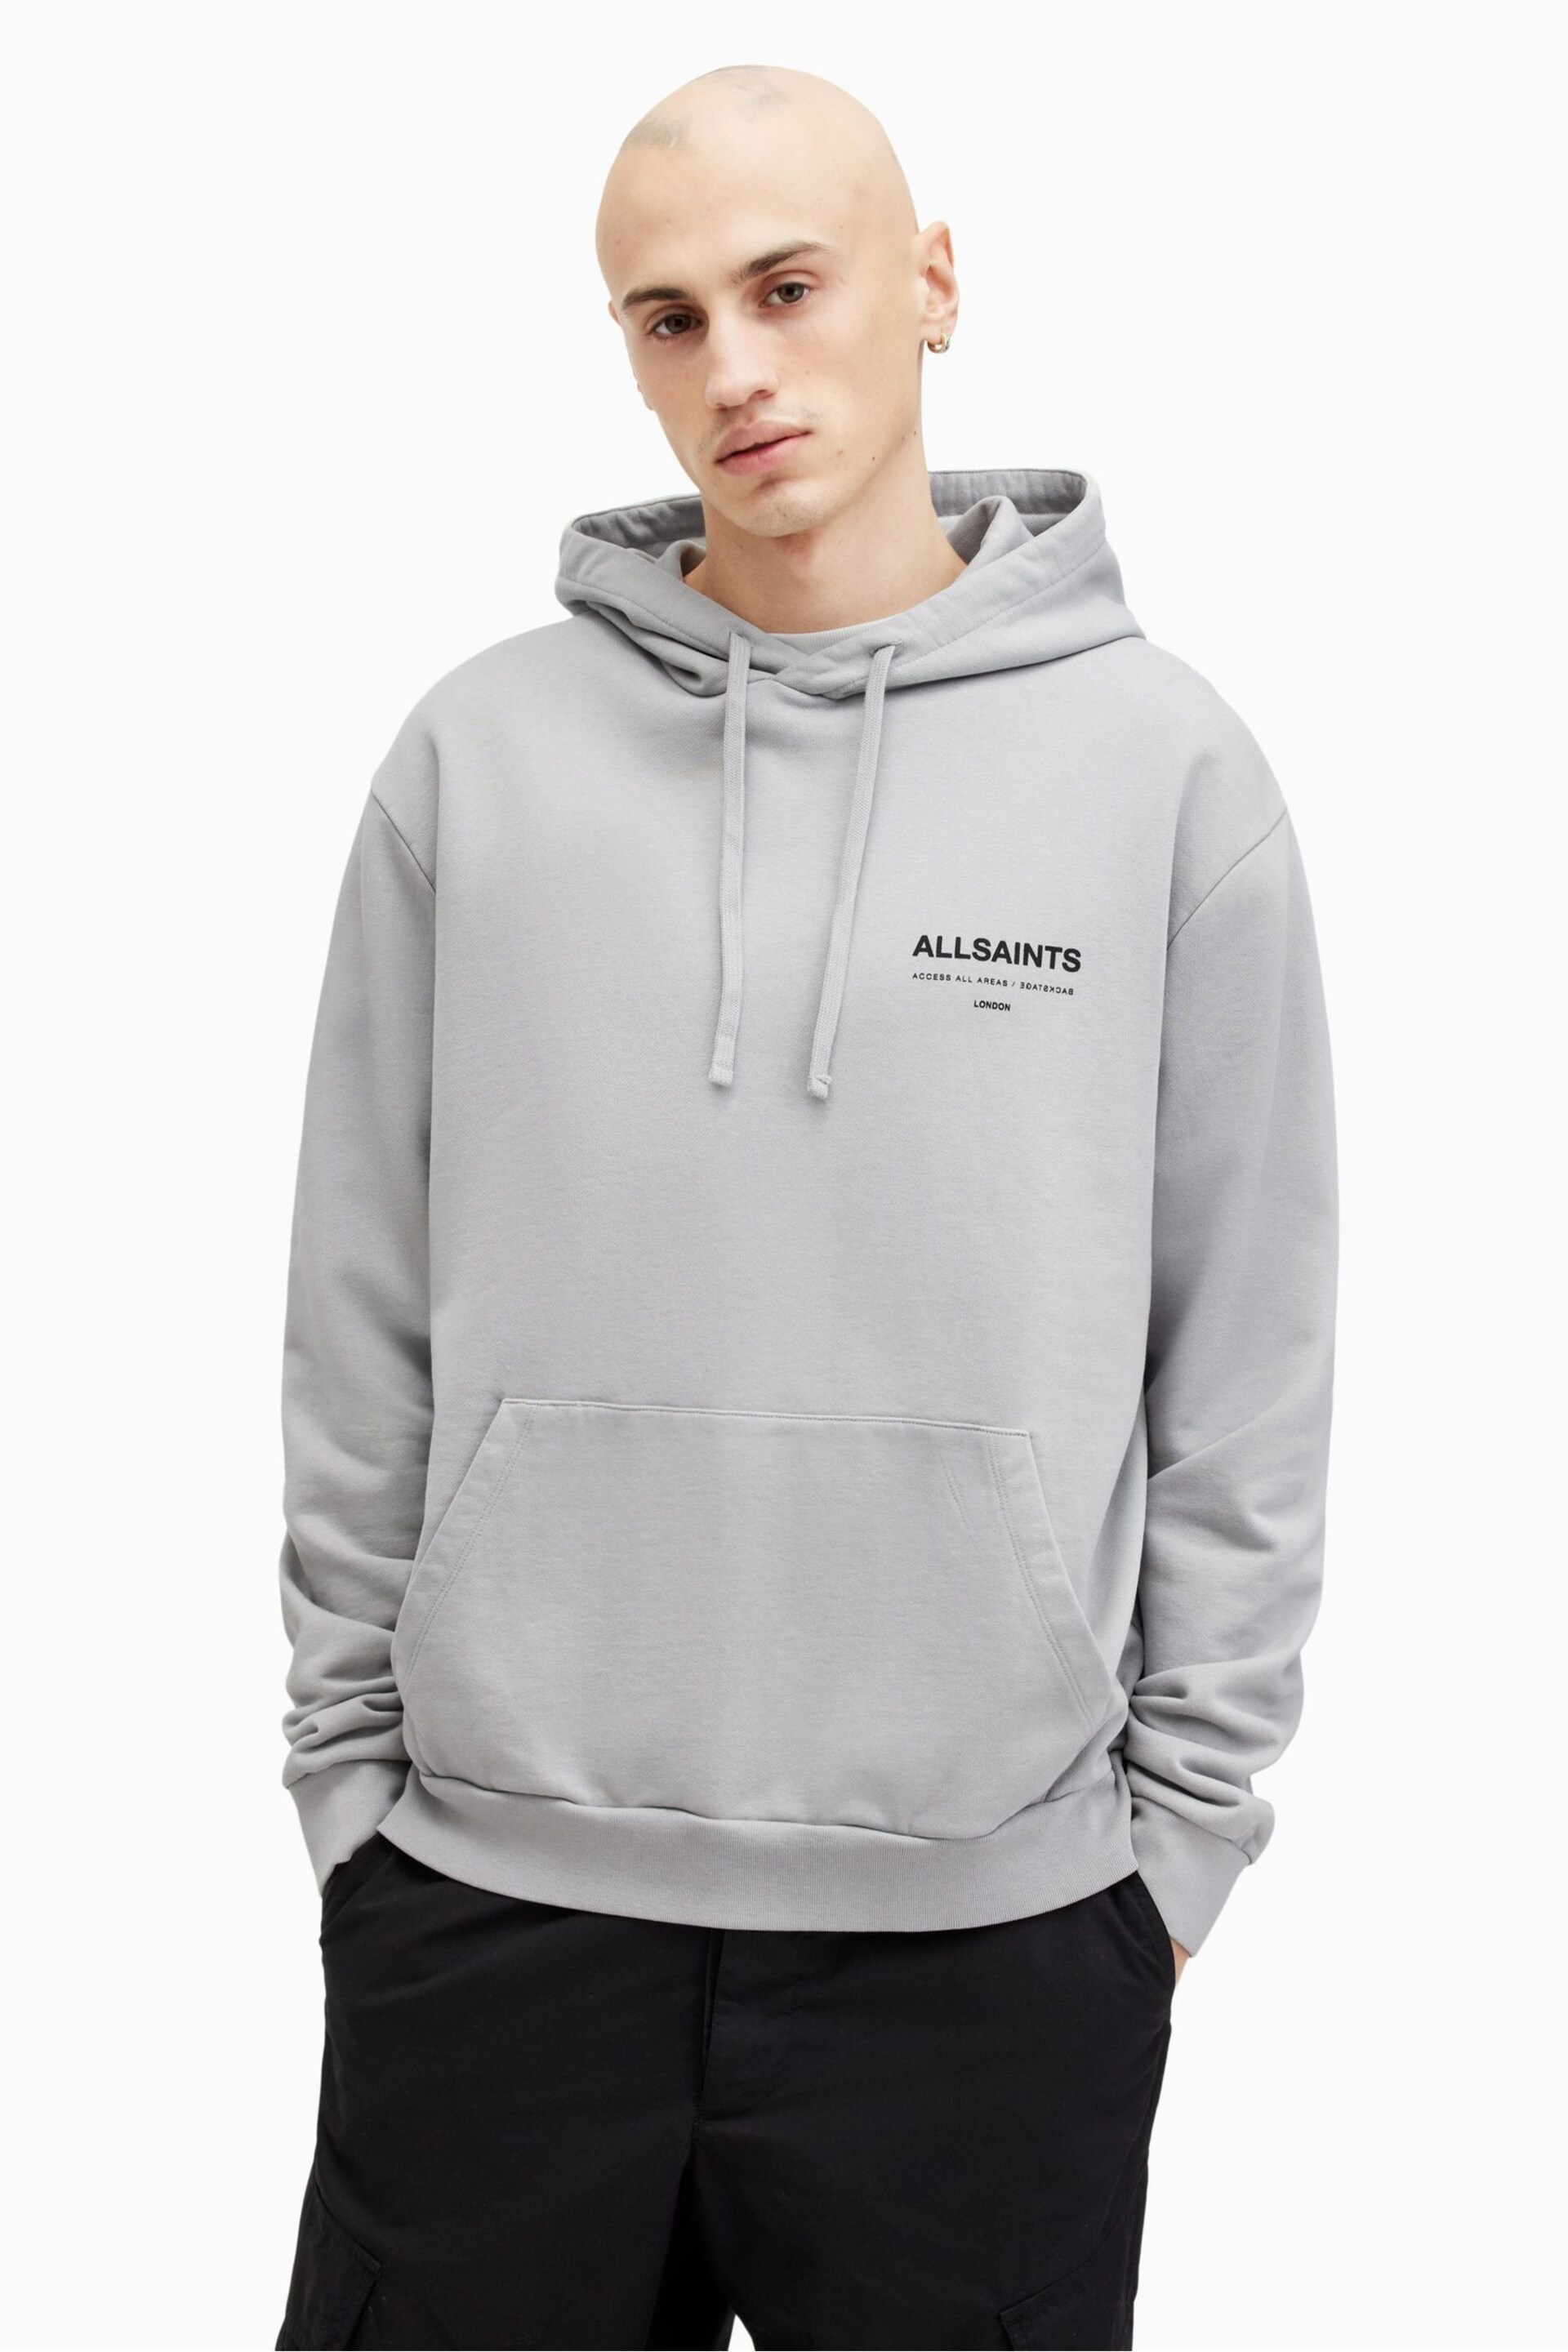 AllSaints Grey Access Over The Head Hoodie - Image 1 of 8